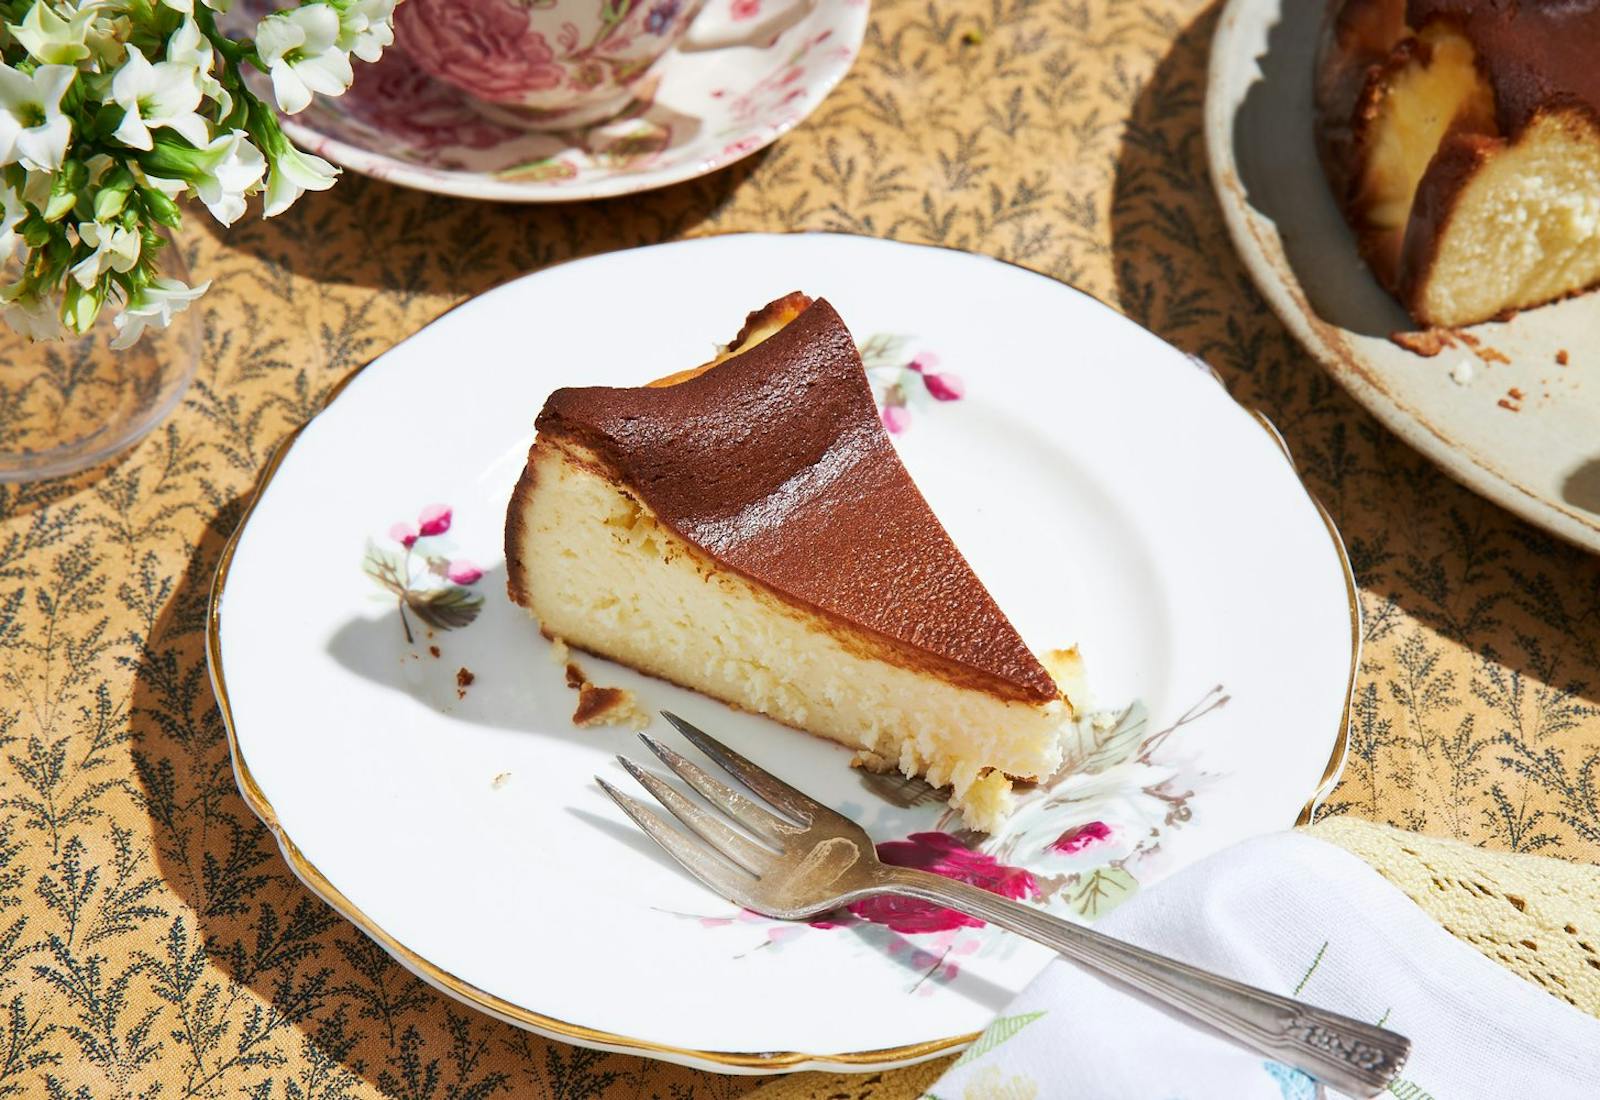 Burnished cheesecake with tea cups, serving plate, and white flowers.